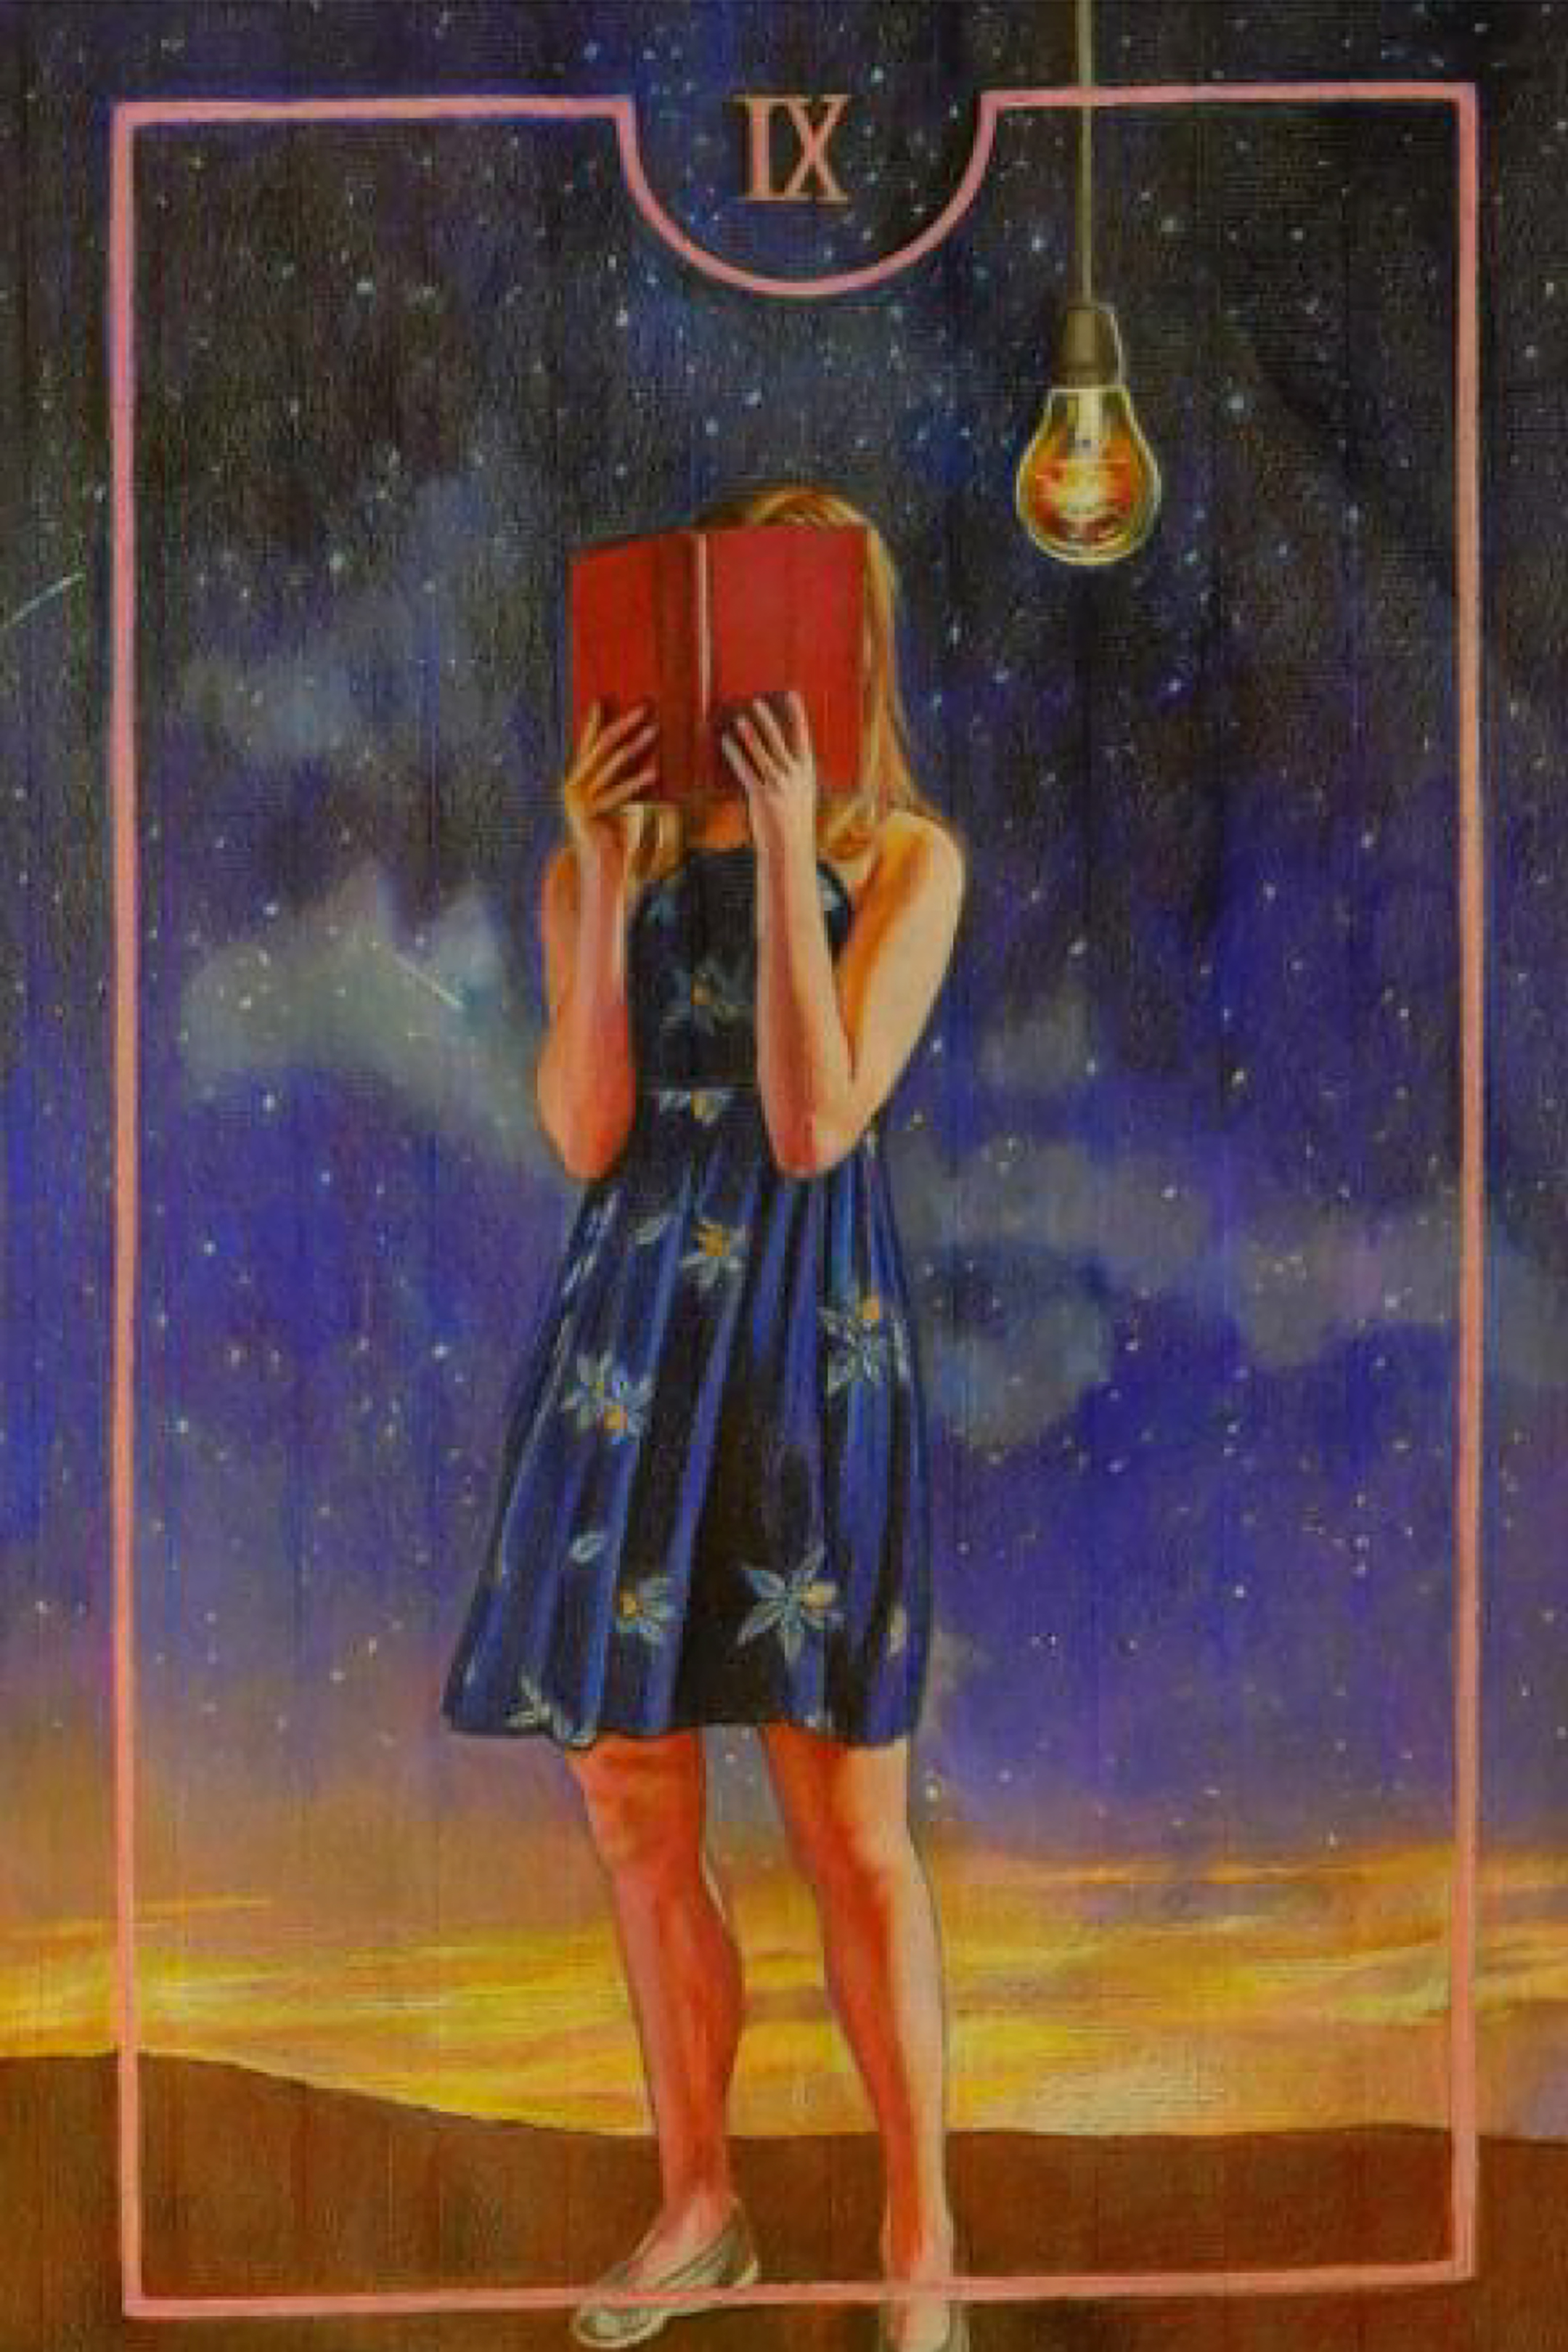 Painting of a white girl in a dress reading a book, which covers her face, in front of a purple dusk sky full of stars